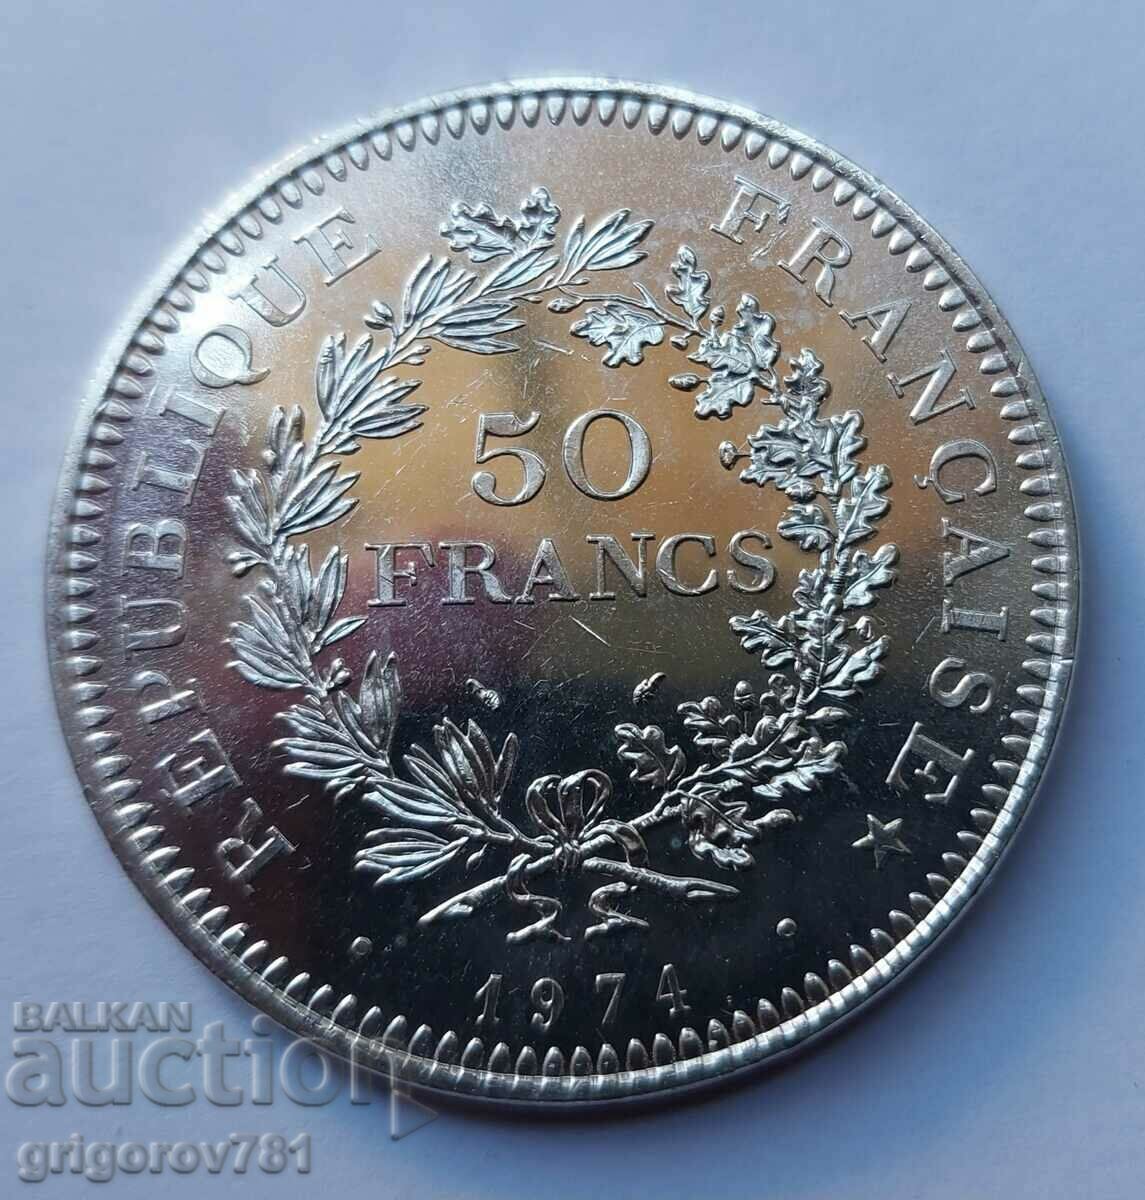 50 Francs Silver France 1974 - Silver Coin #28